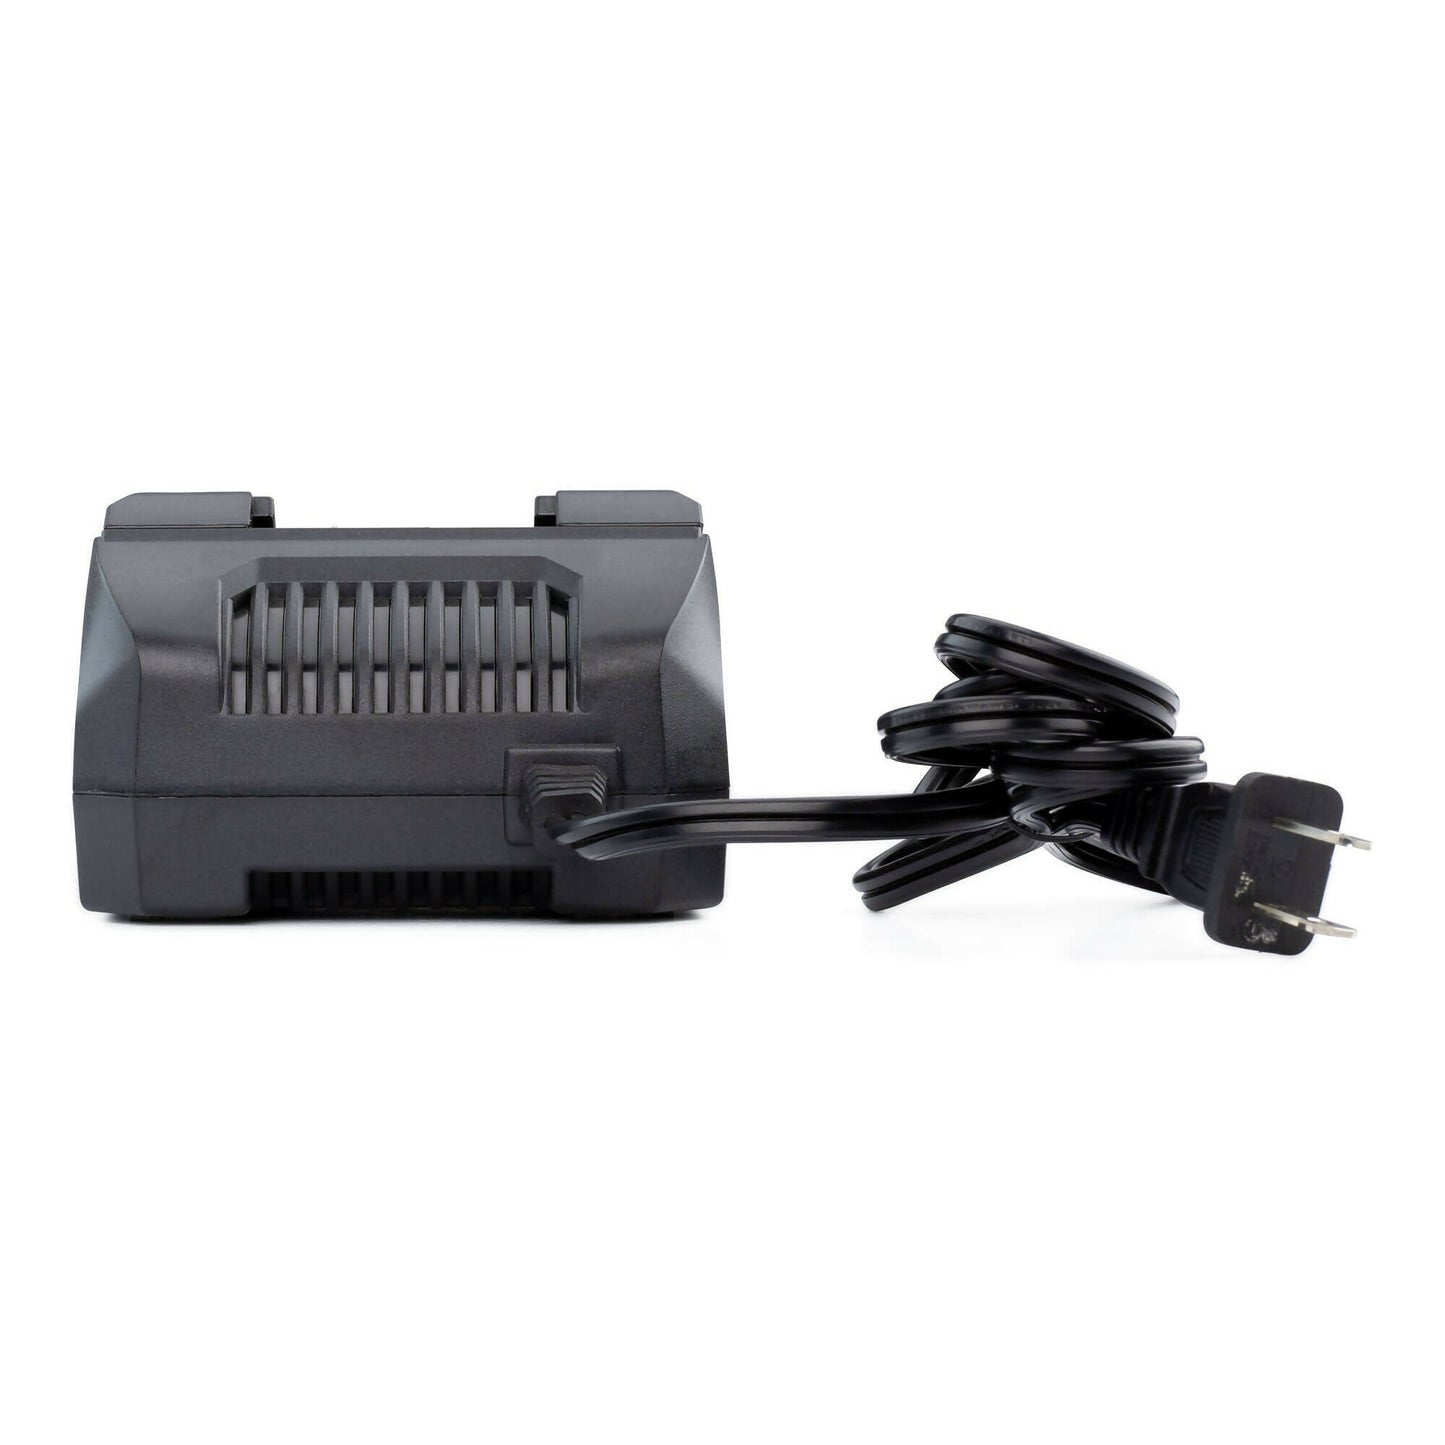 Wild Badger Power Cordless 20 Volt 2.0A Fast Charger